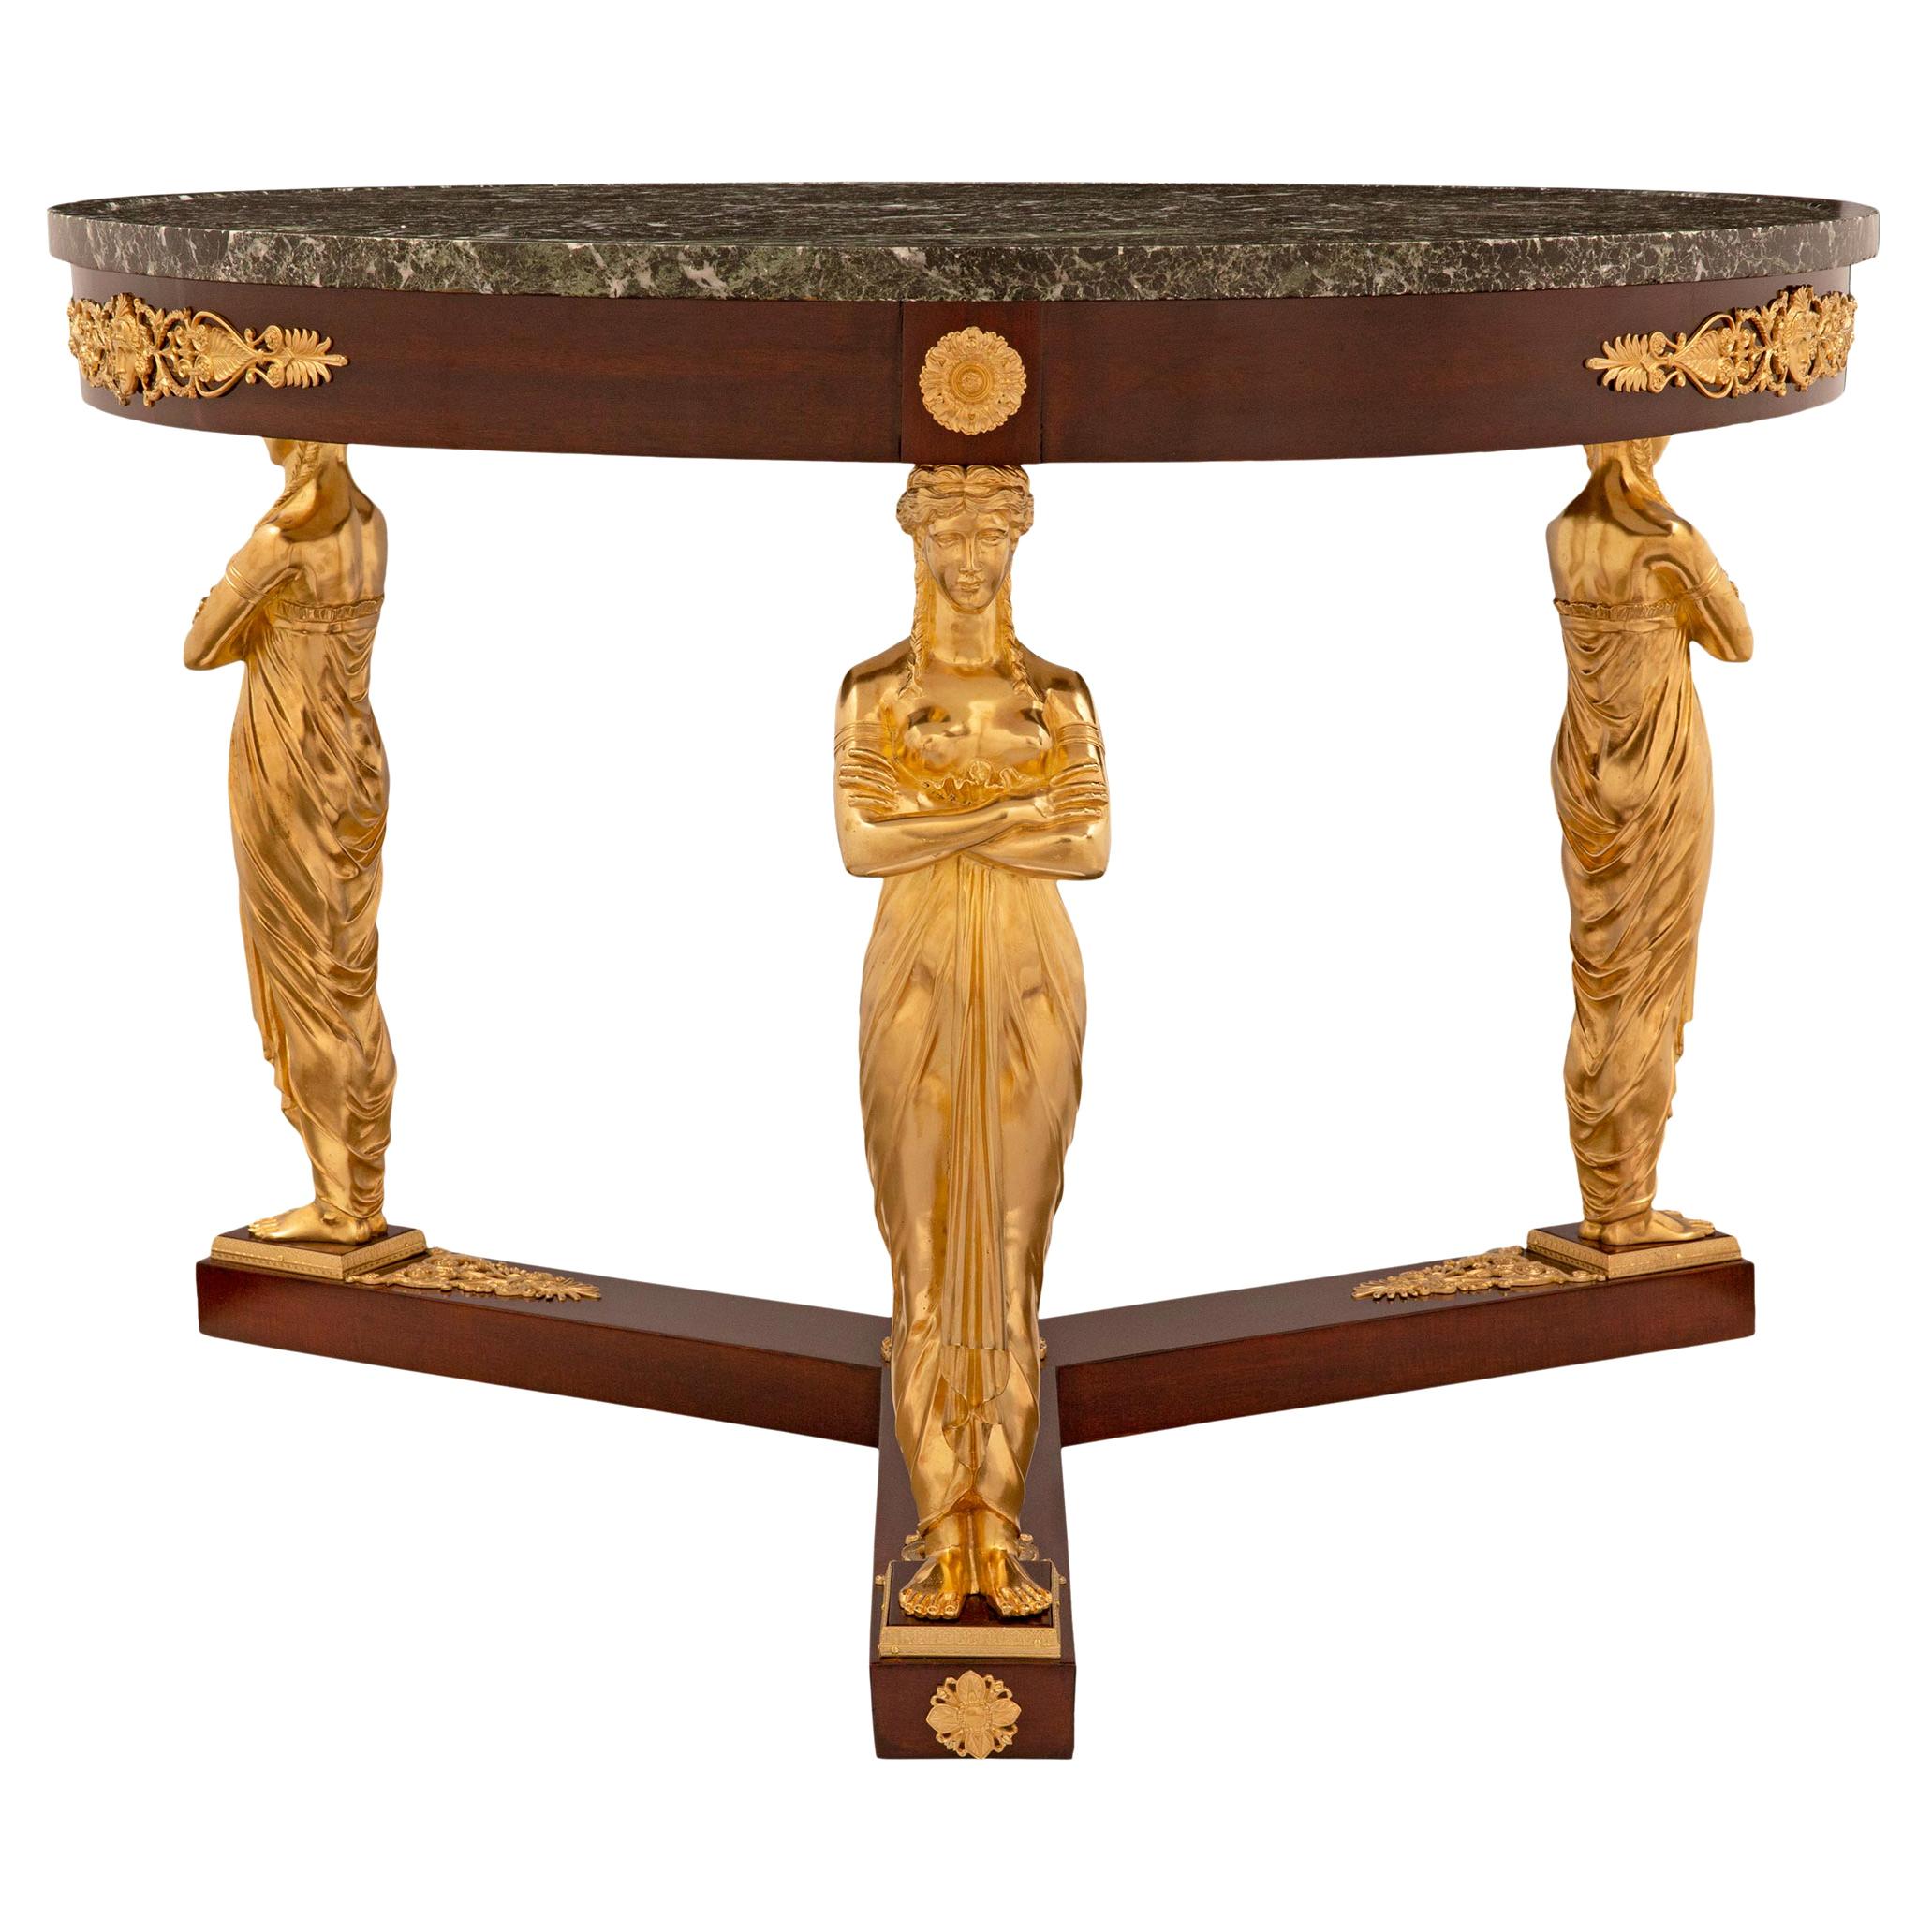 French Early 19th Century Empire Neoclassical Style Center Table For Sale